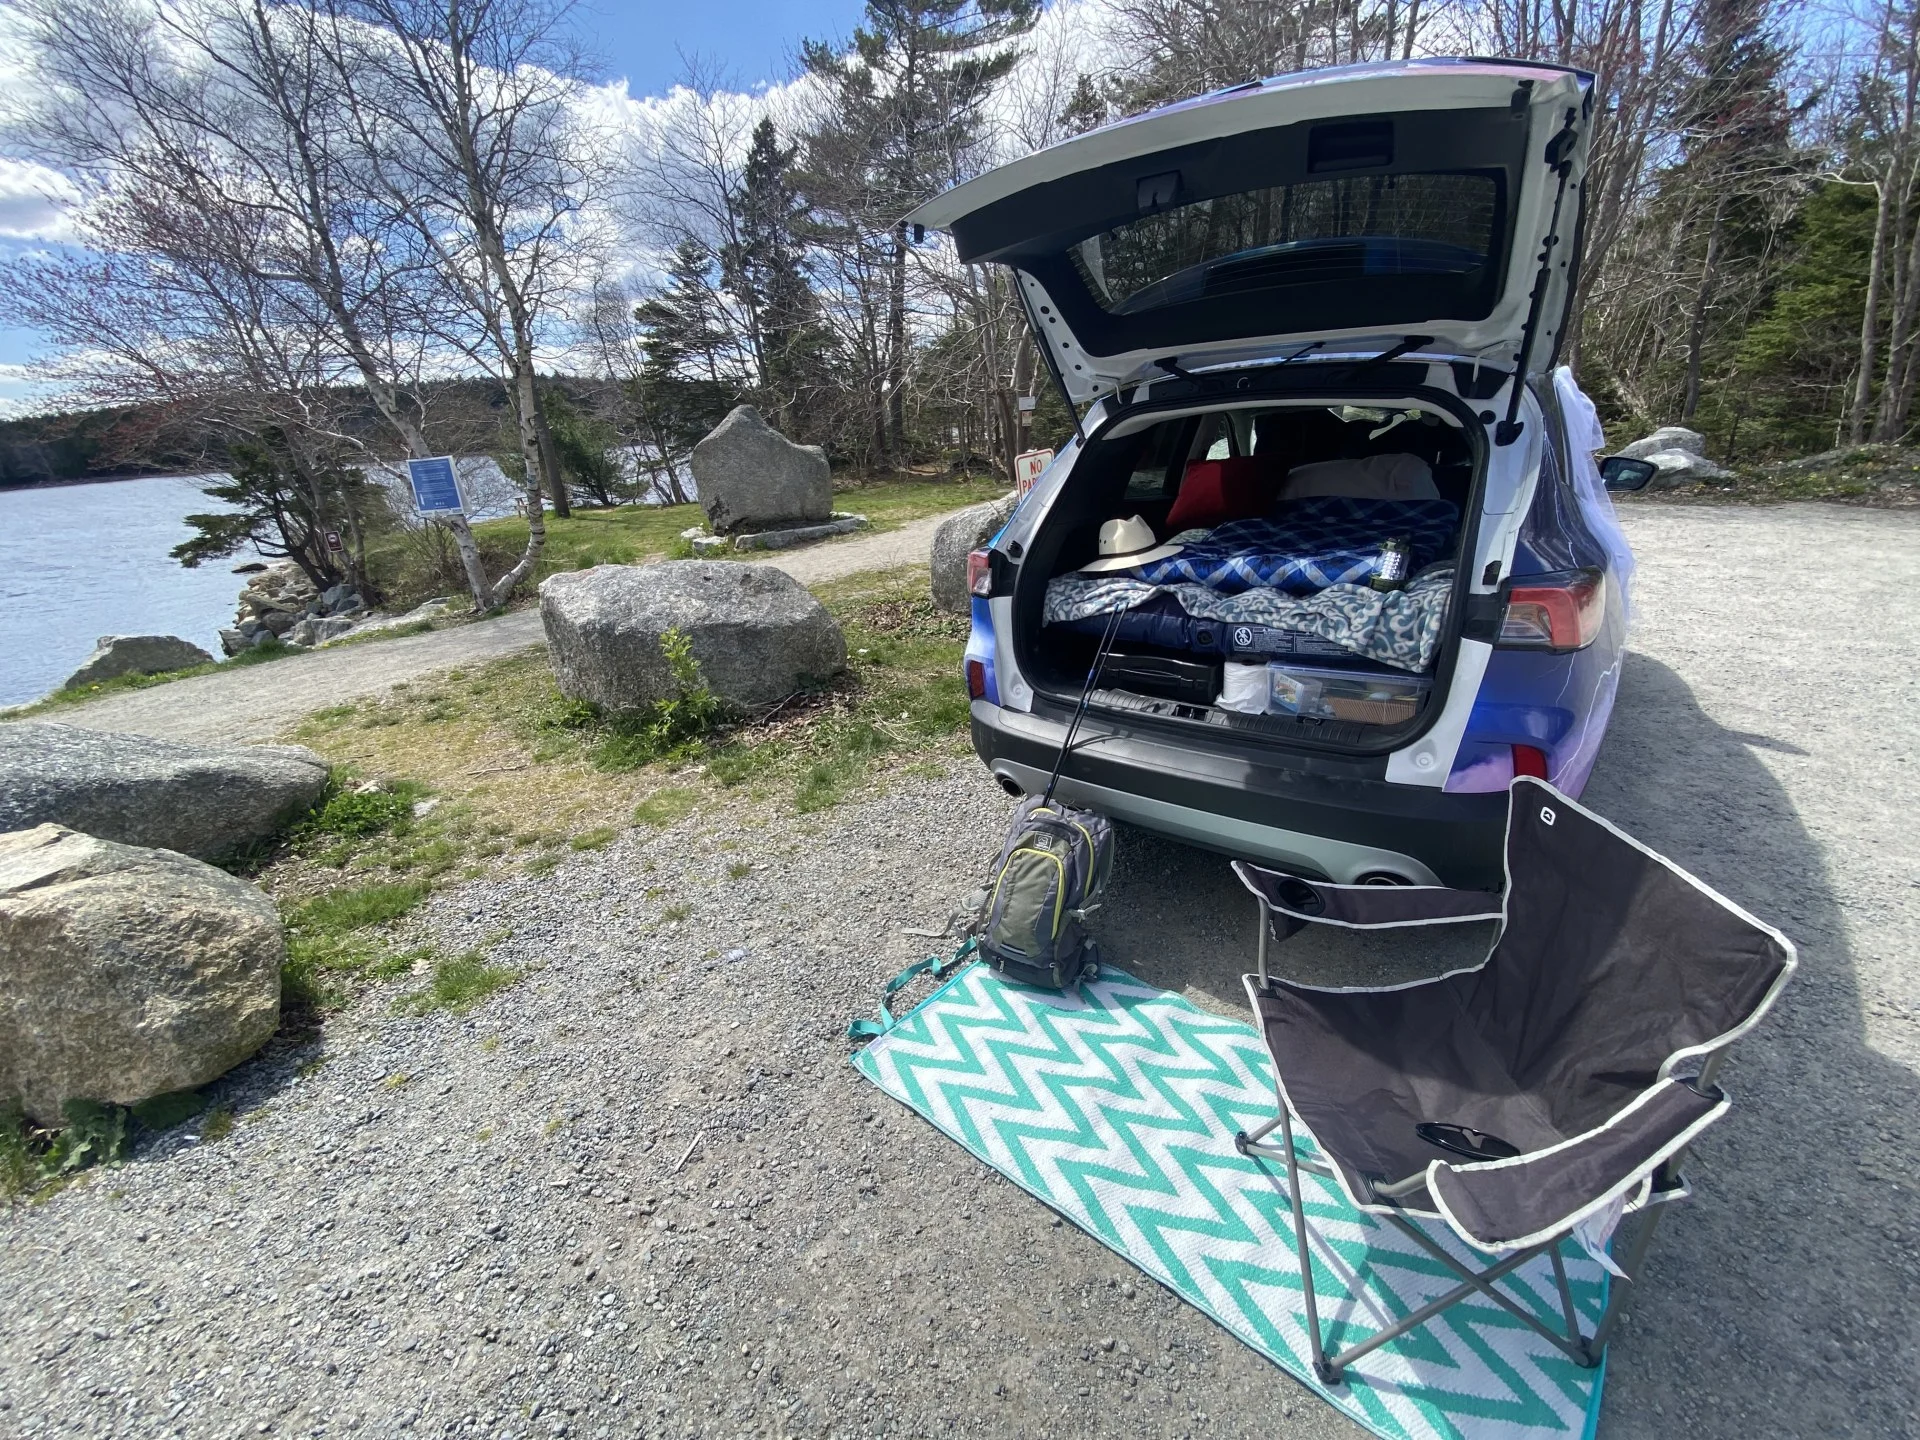 What makes for a successful car camping trip? Get some some tips here for the best ways to sleep in your car this summer